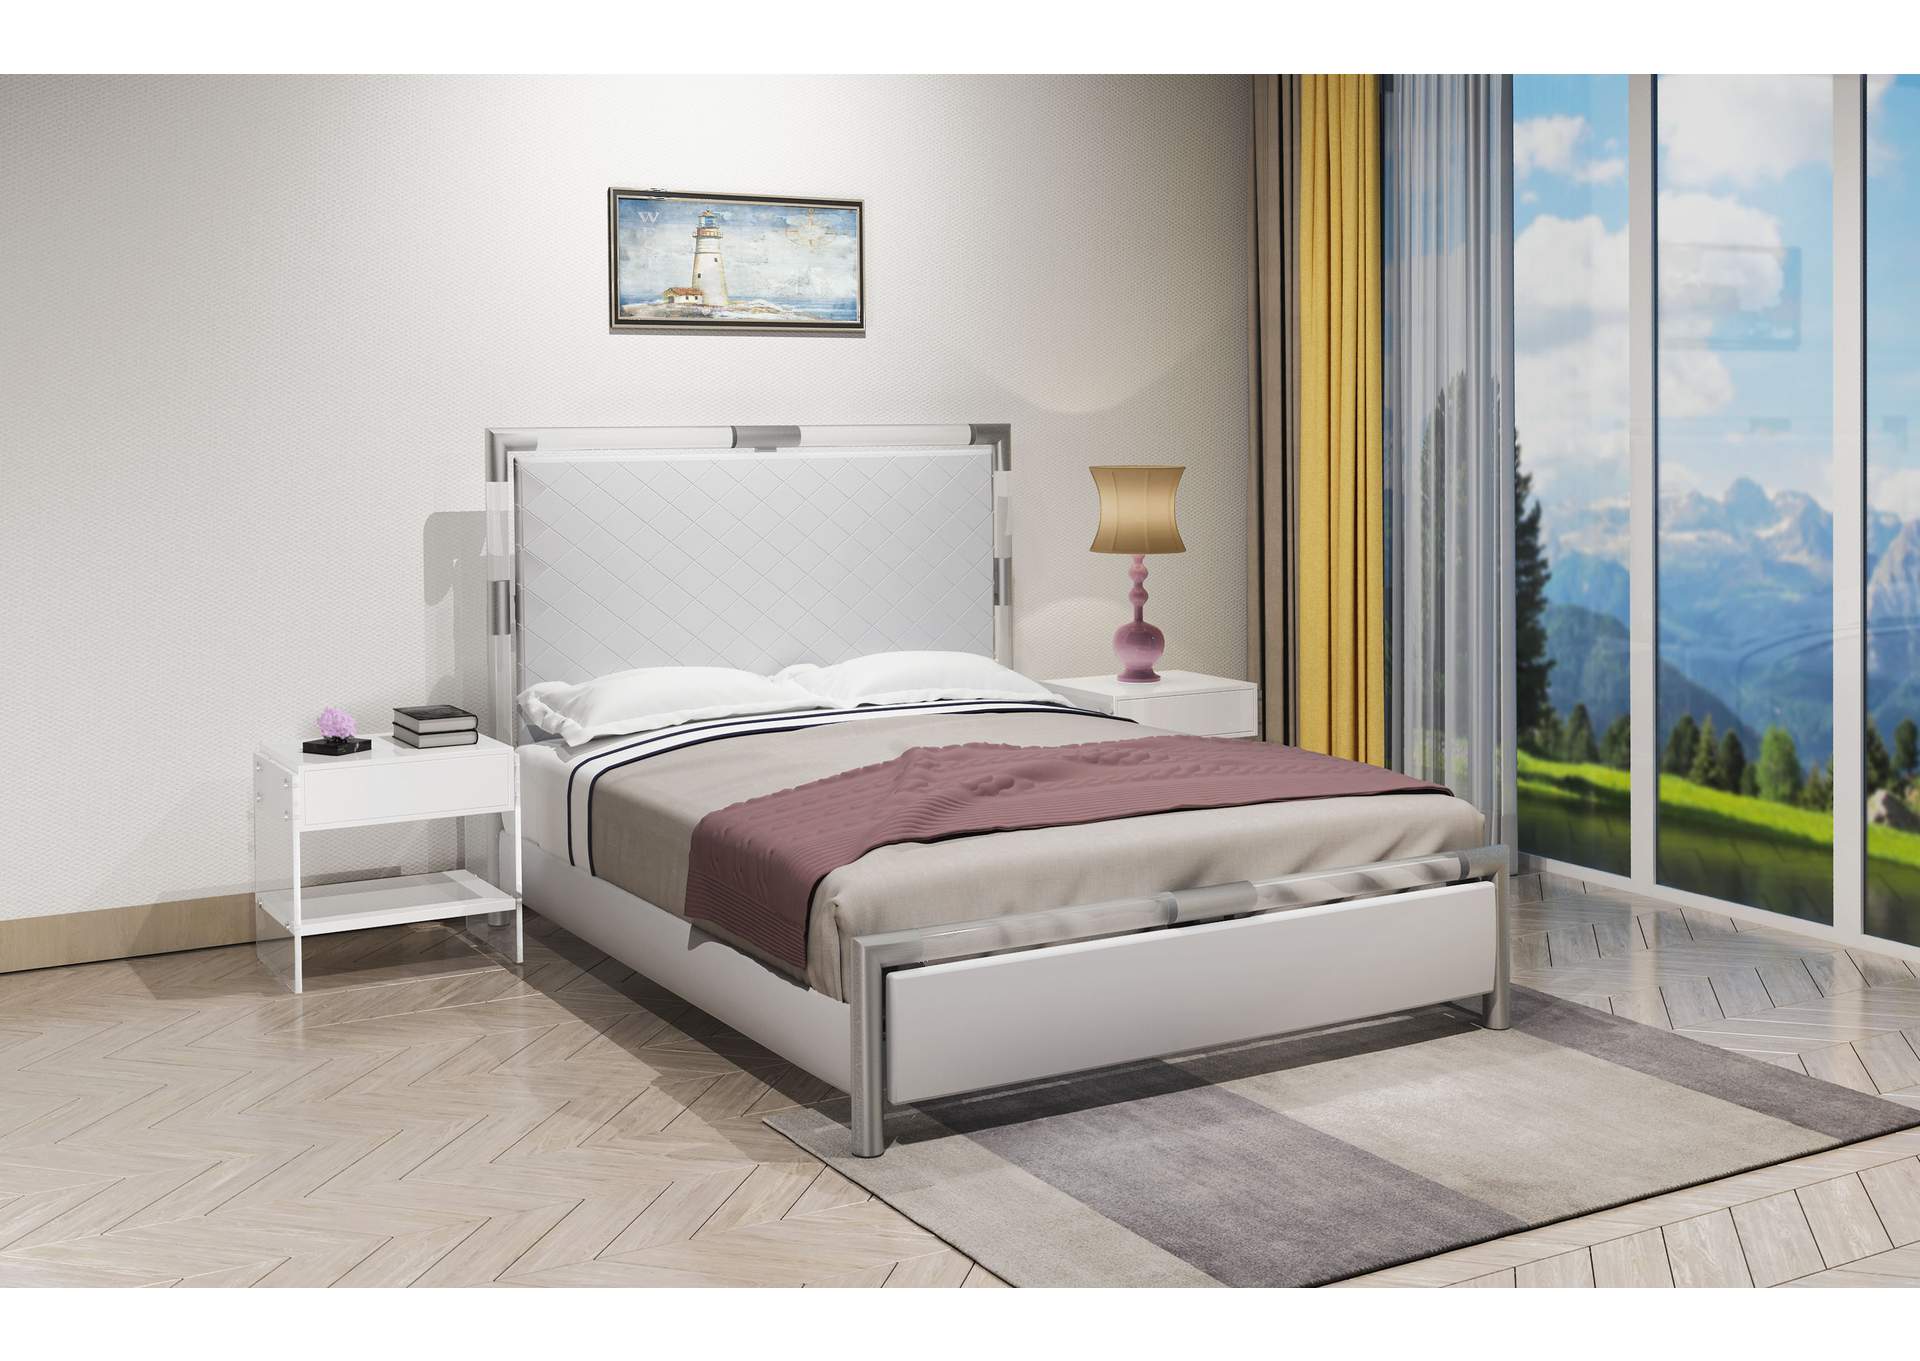 Acrylic Bedroom Set With Queen Bed , Buffet & Lamp Table,Chintaly Imports